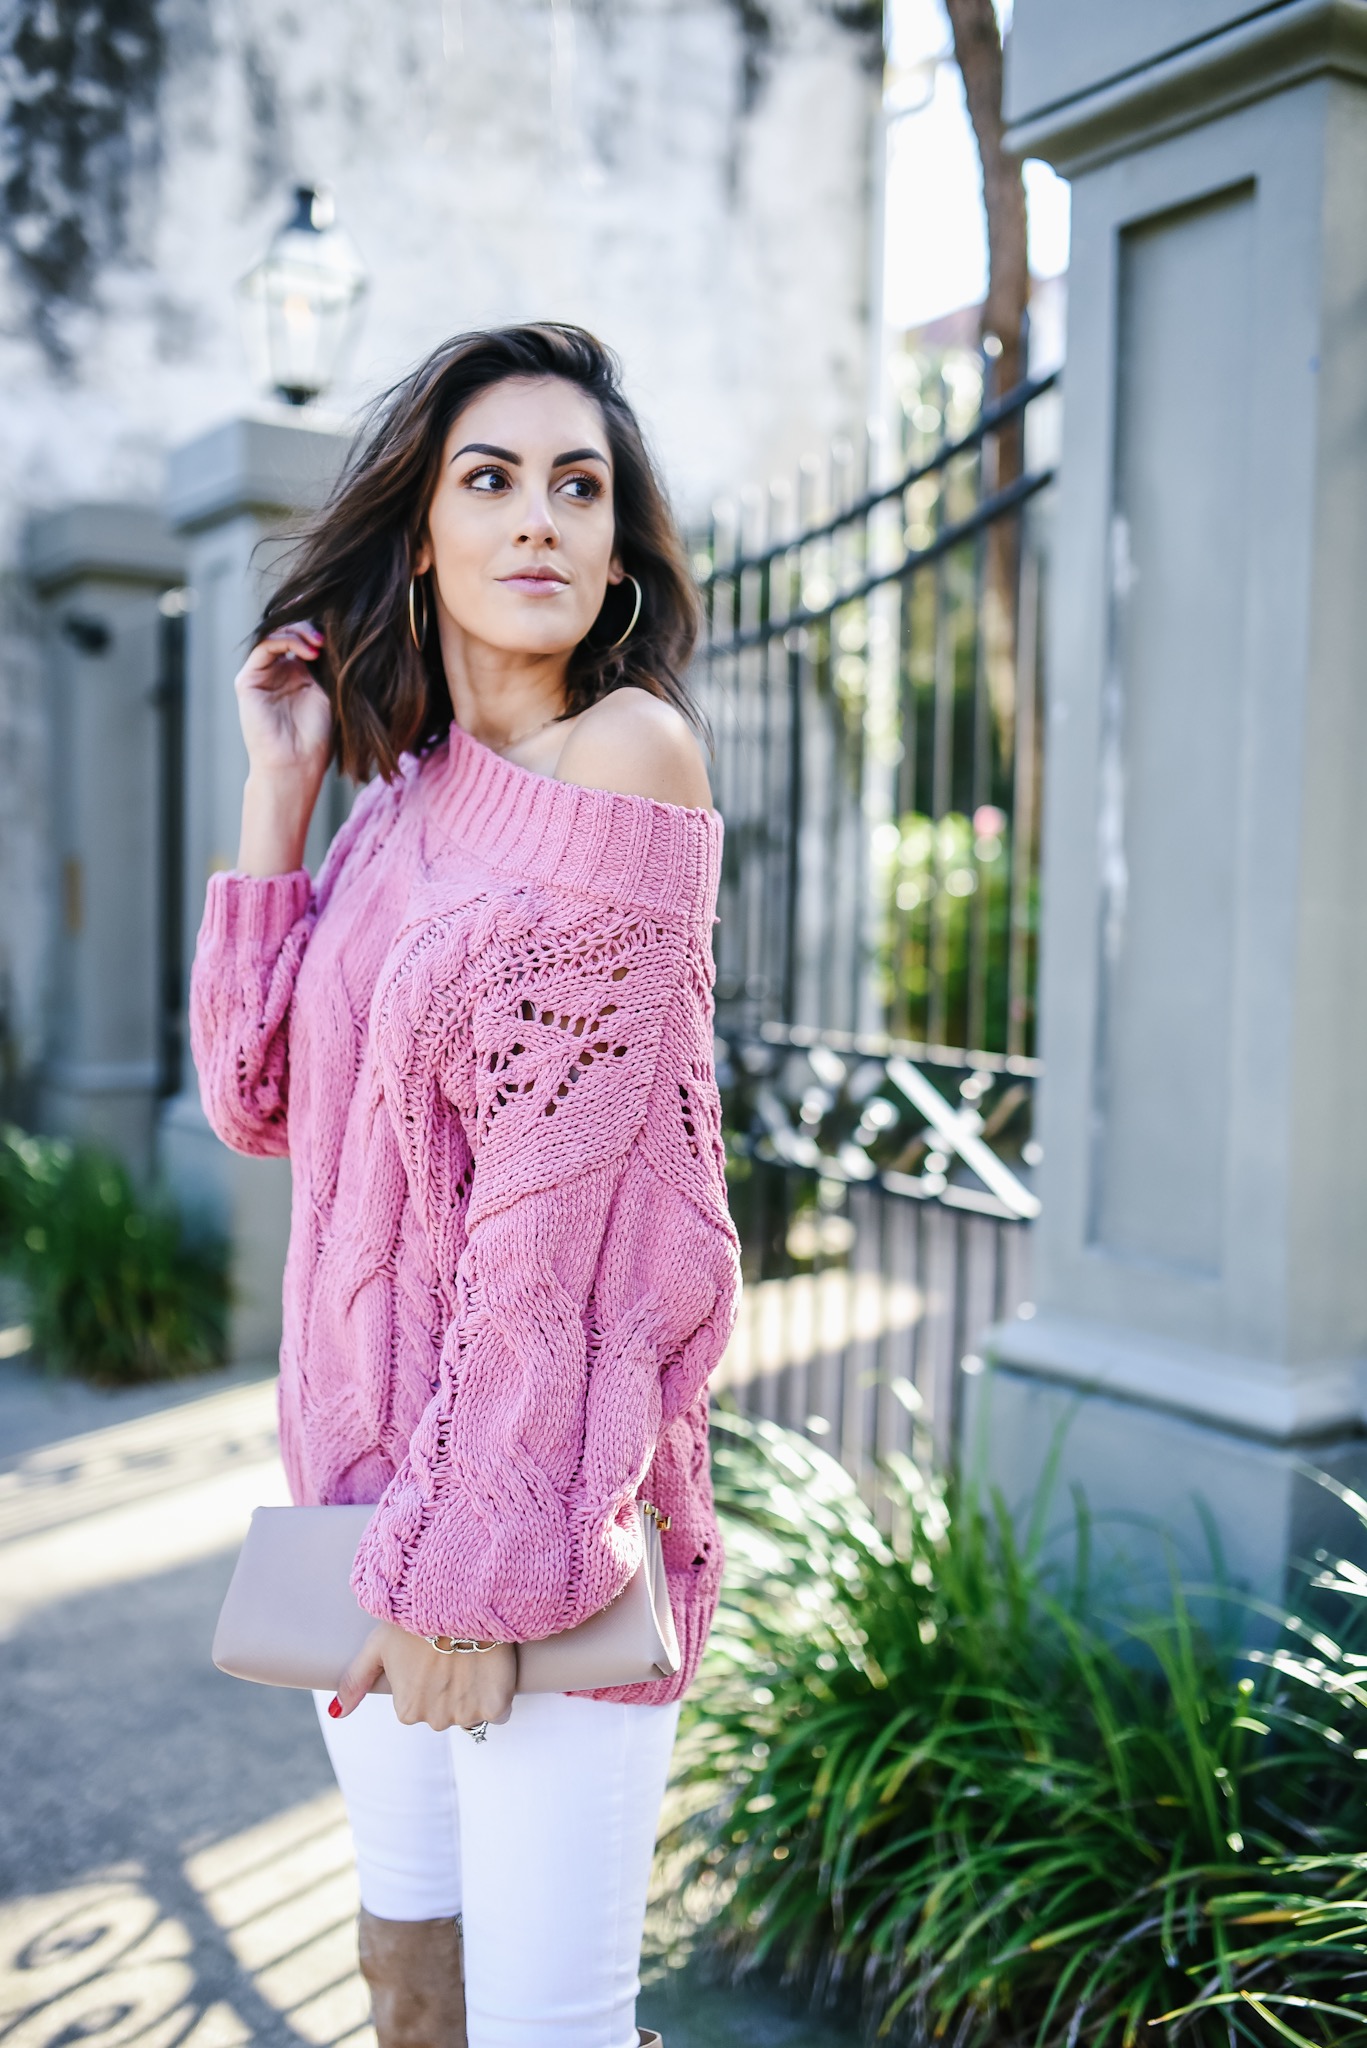 The Pink Off The Shoulder Sweater You NEED For Under $50 - STYLETHEGIRL